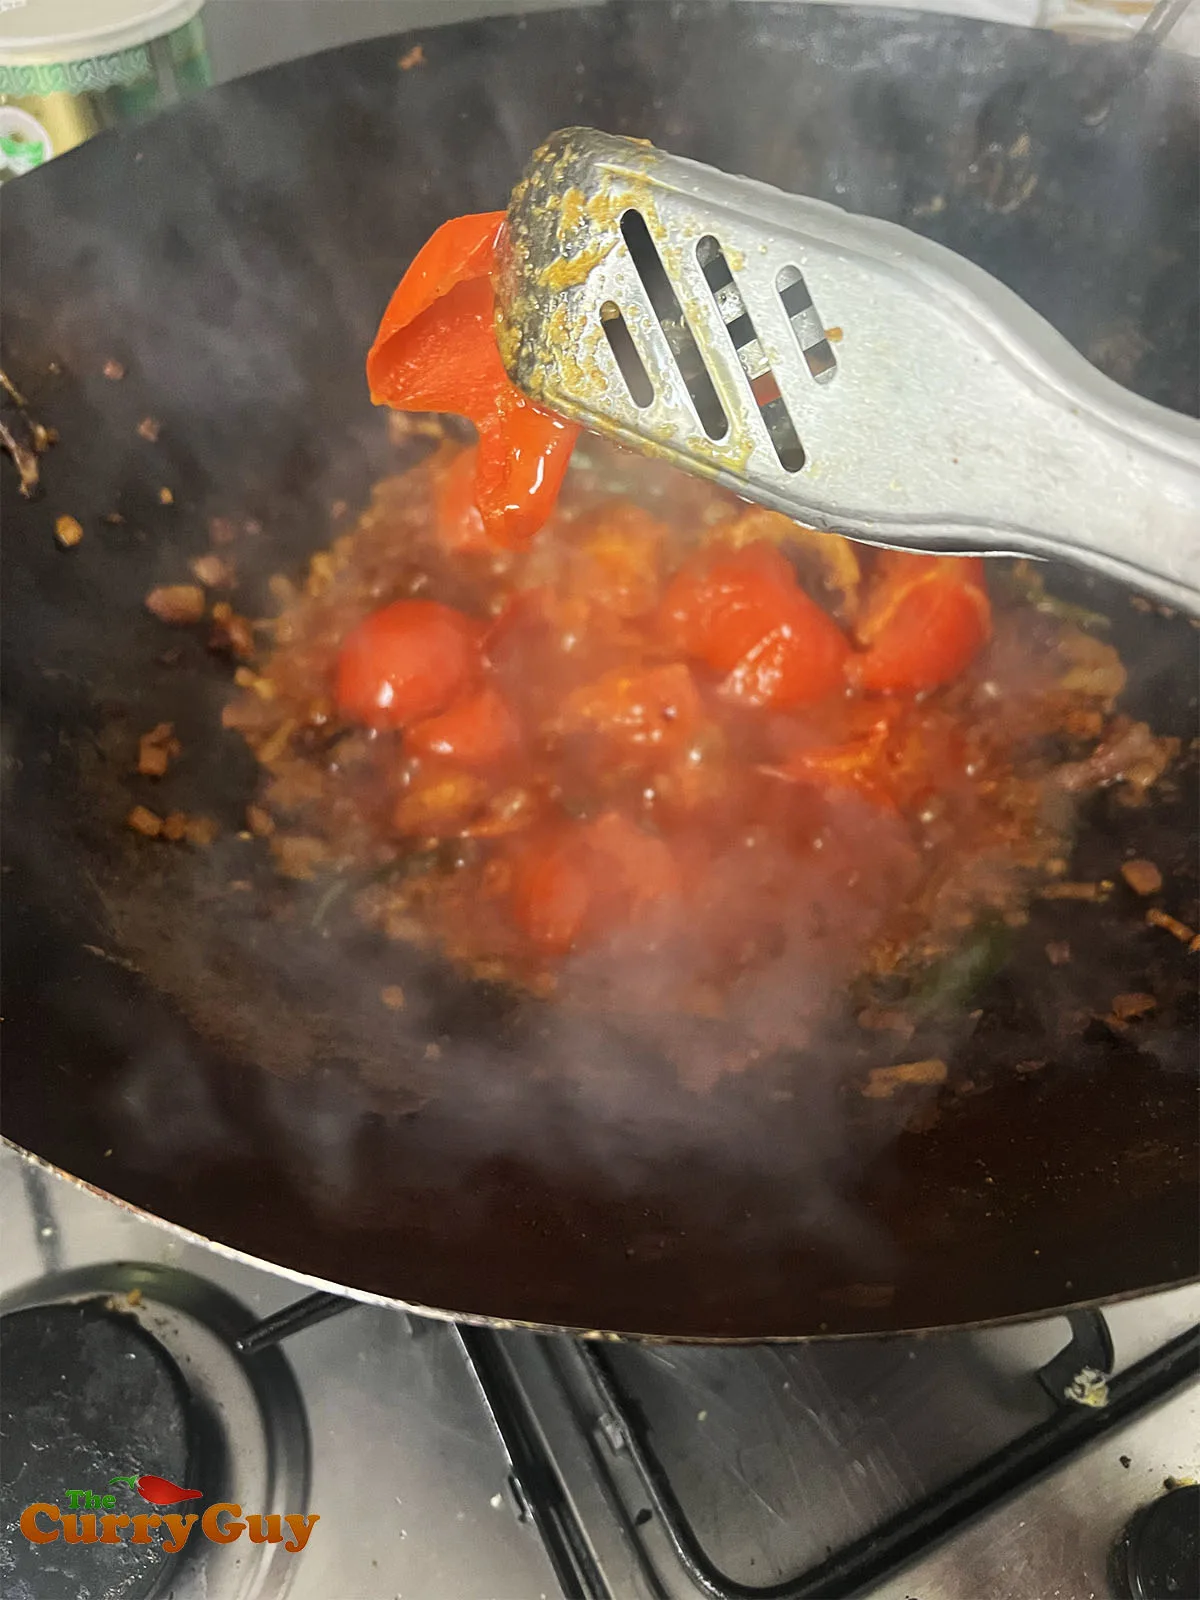 Removing the tomato skins